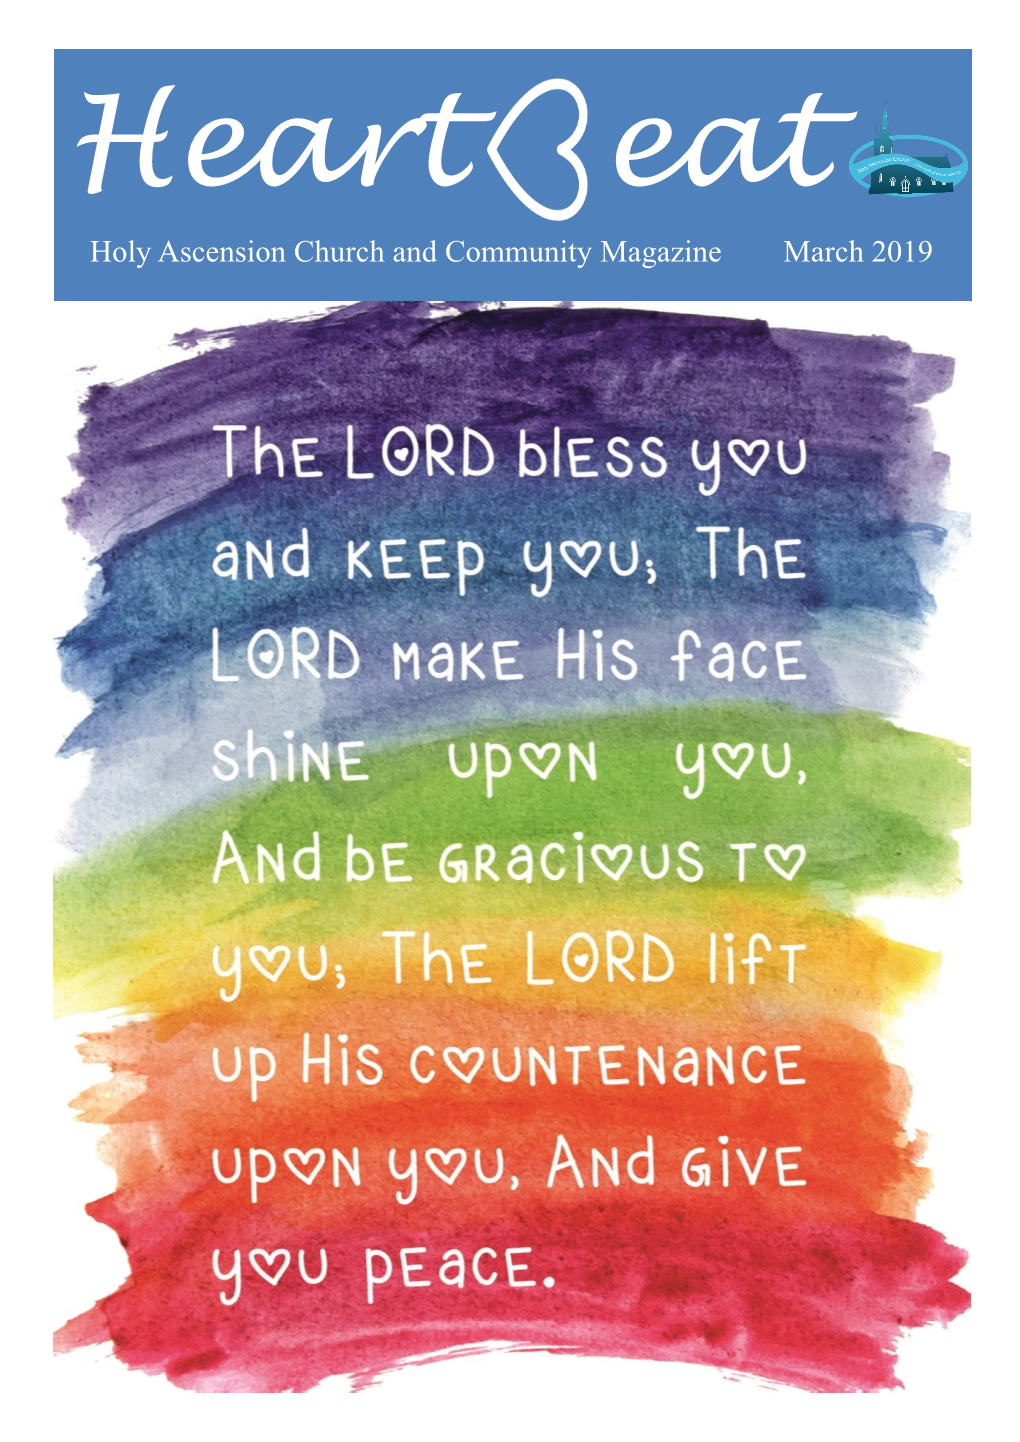 Holy Ascension Church and Community Magazine March 2019 Welcome to Heartbeat …